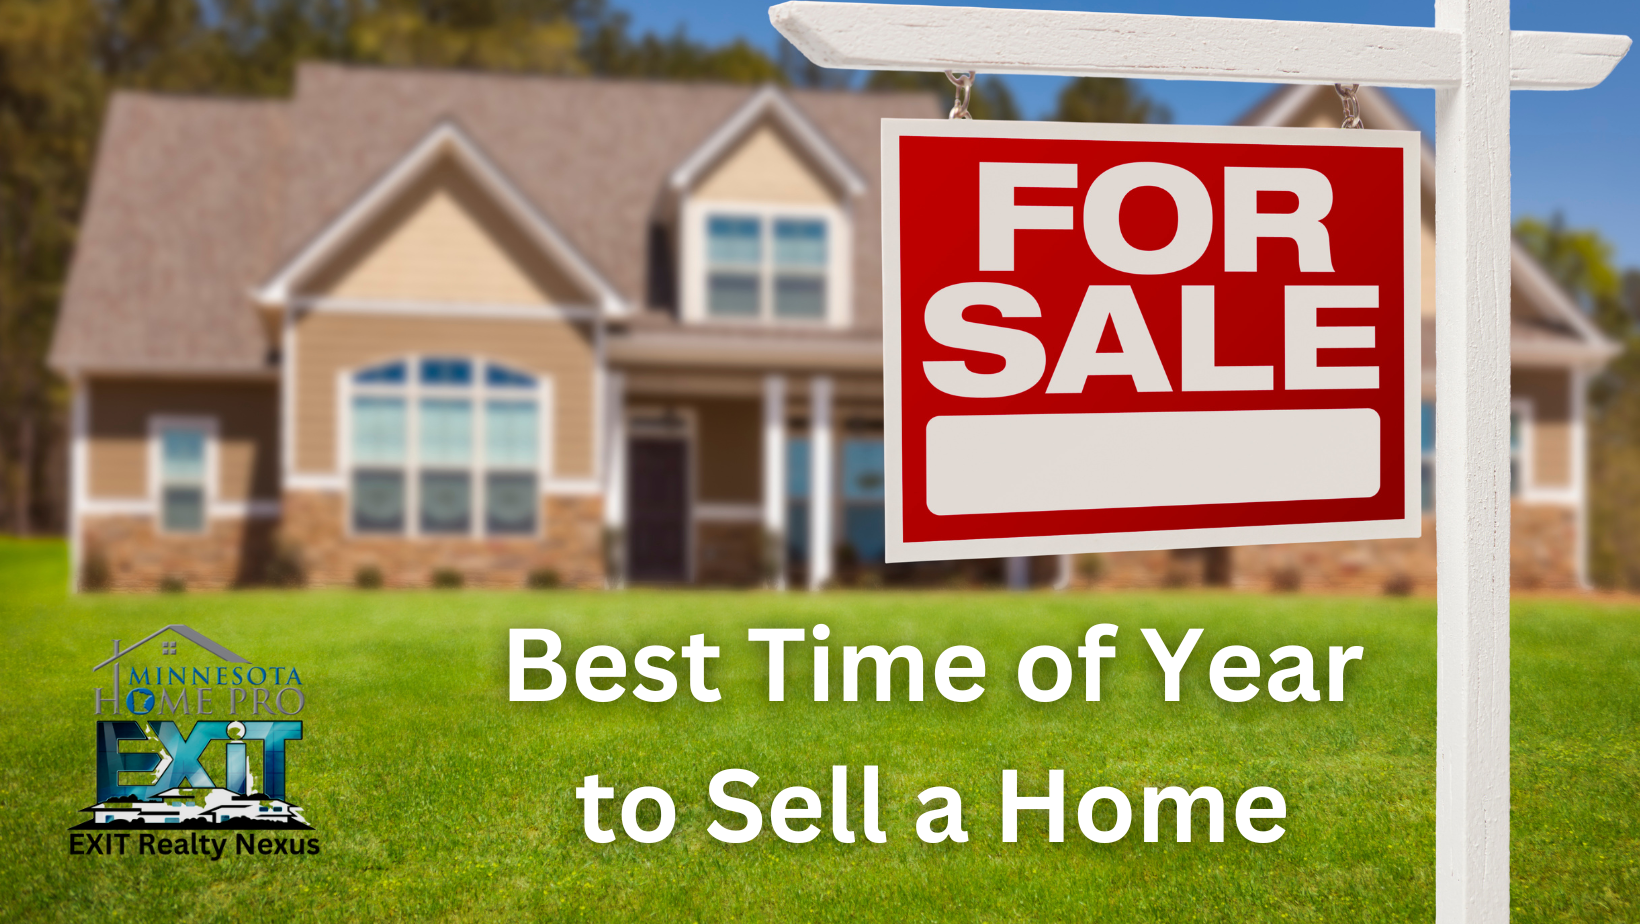 The Best Time of Year to Sell a Home